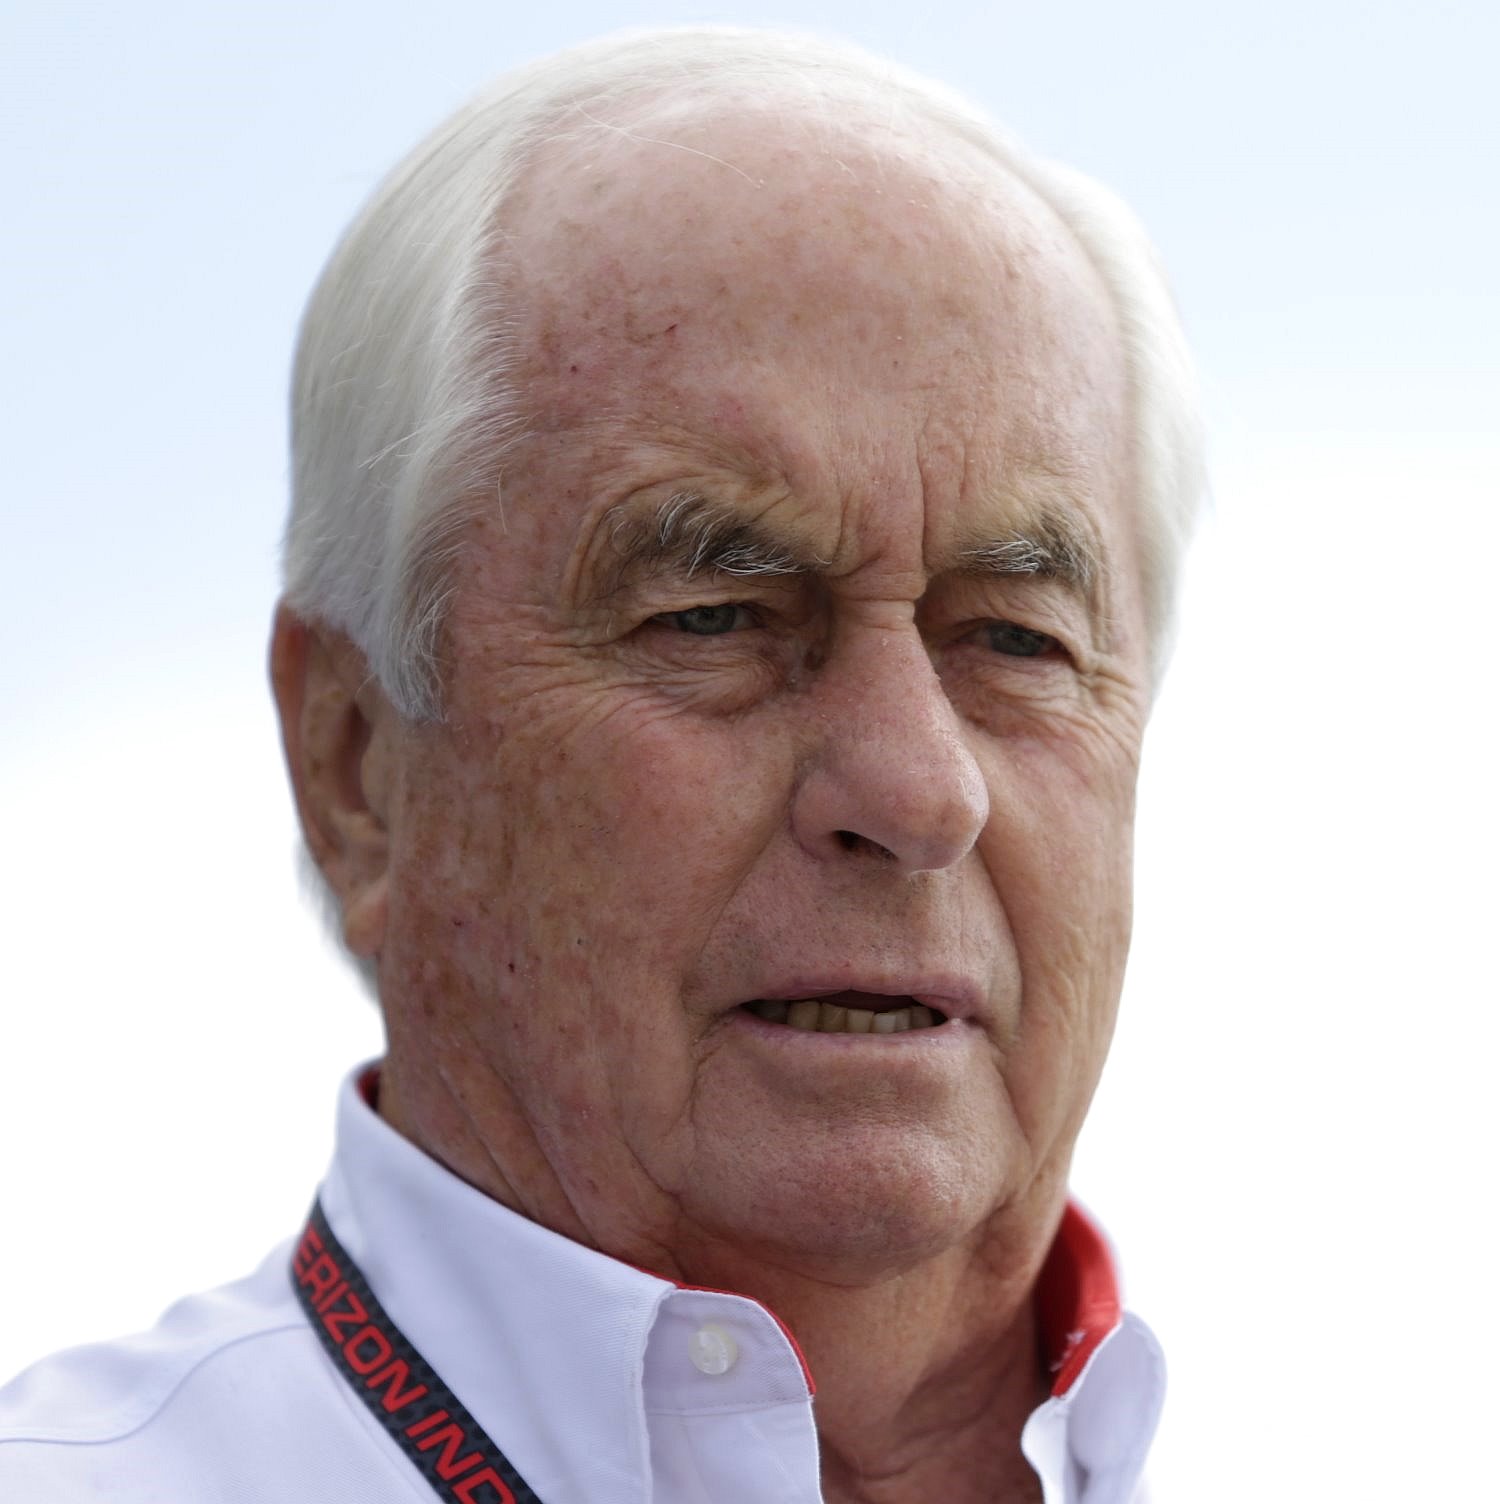 Penske learned from IndyCar, when Tony George destroyed the sport fans and sponsors flew the coup and teams had to cut costs